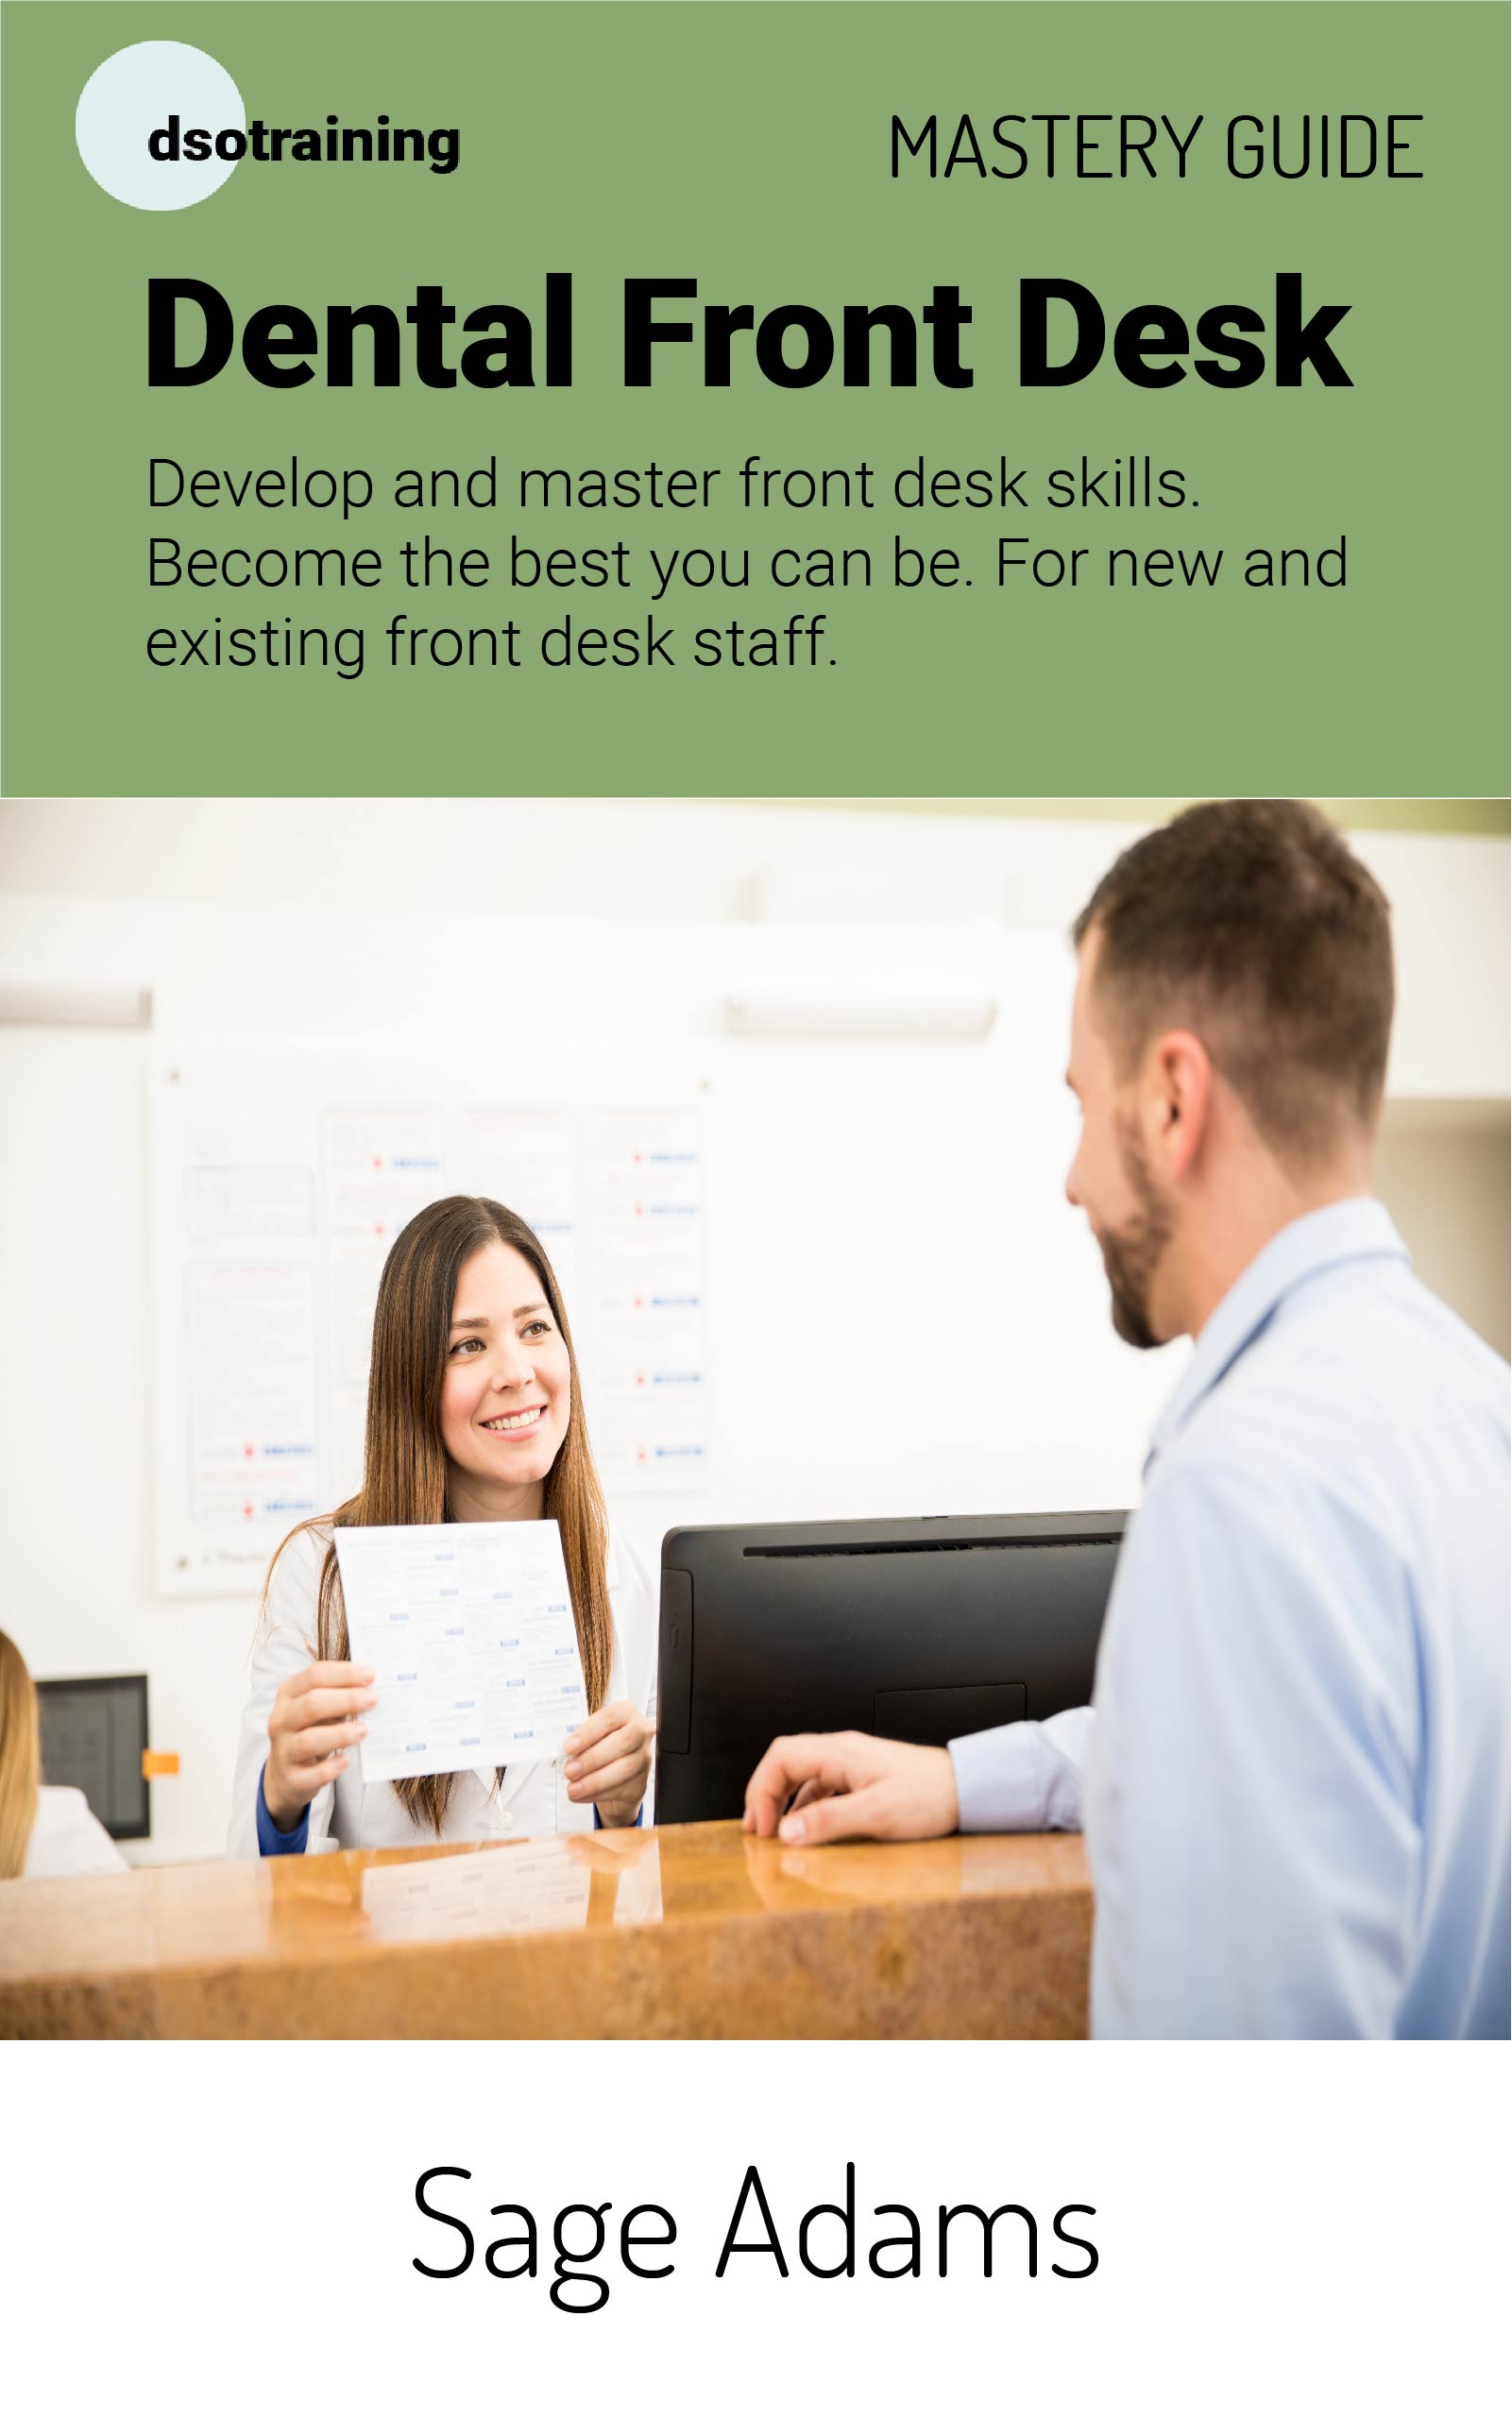 FREE: Dental Front Desk Mastery Guide by Sage Adams